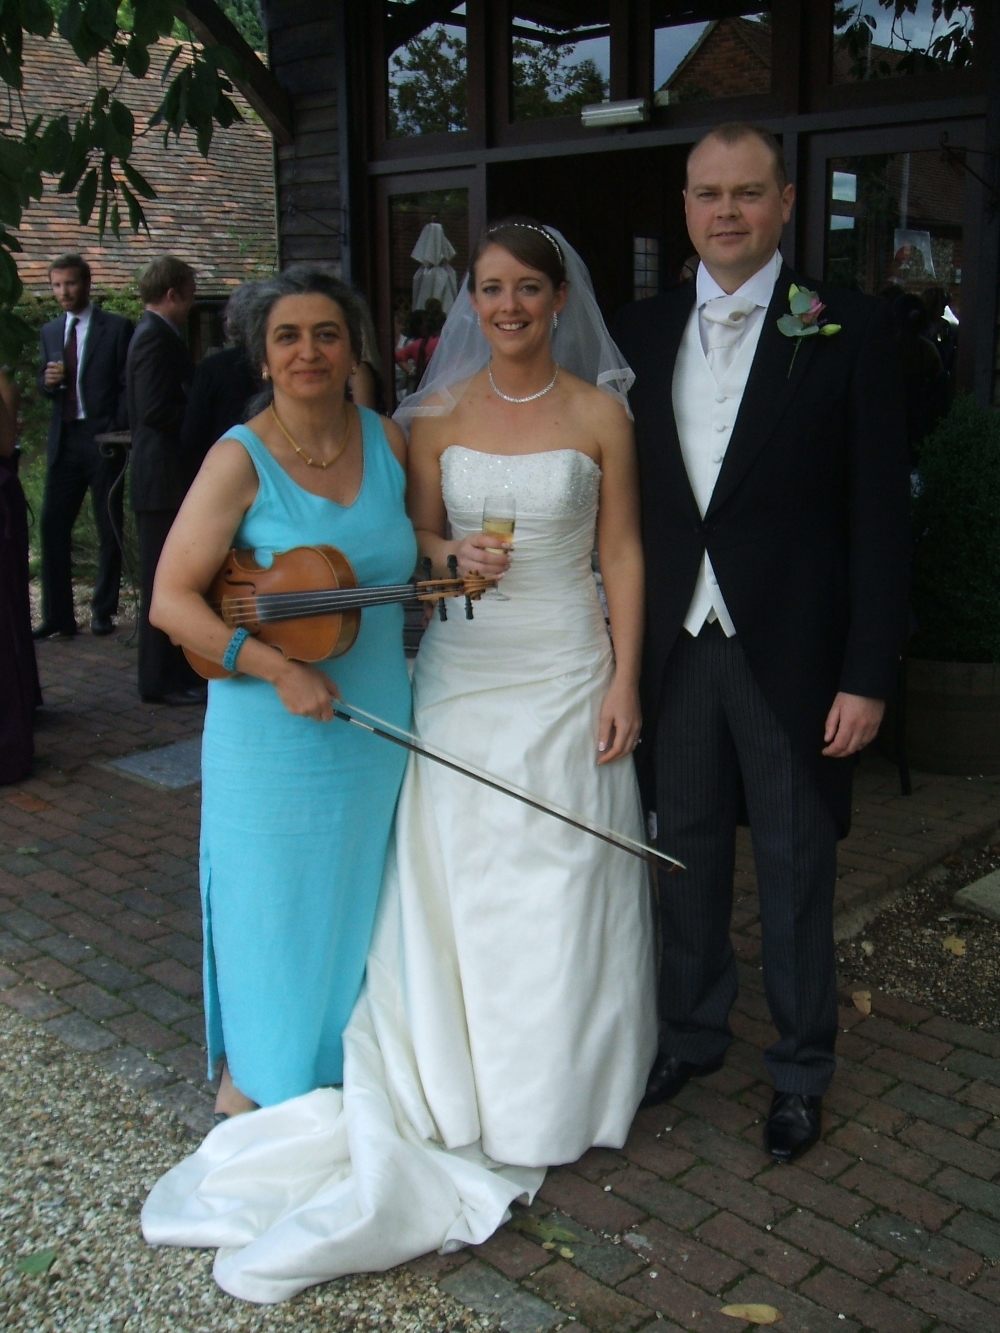 Wedding musician with bride and groom at Bix Manor, near Oxford